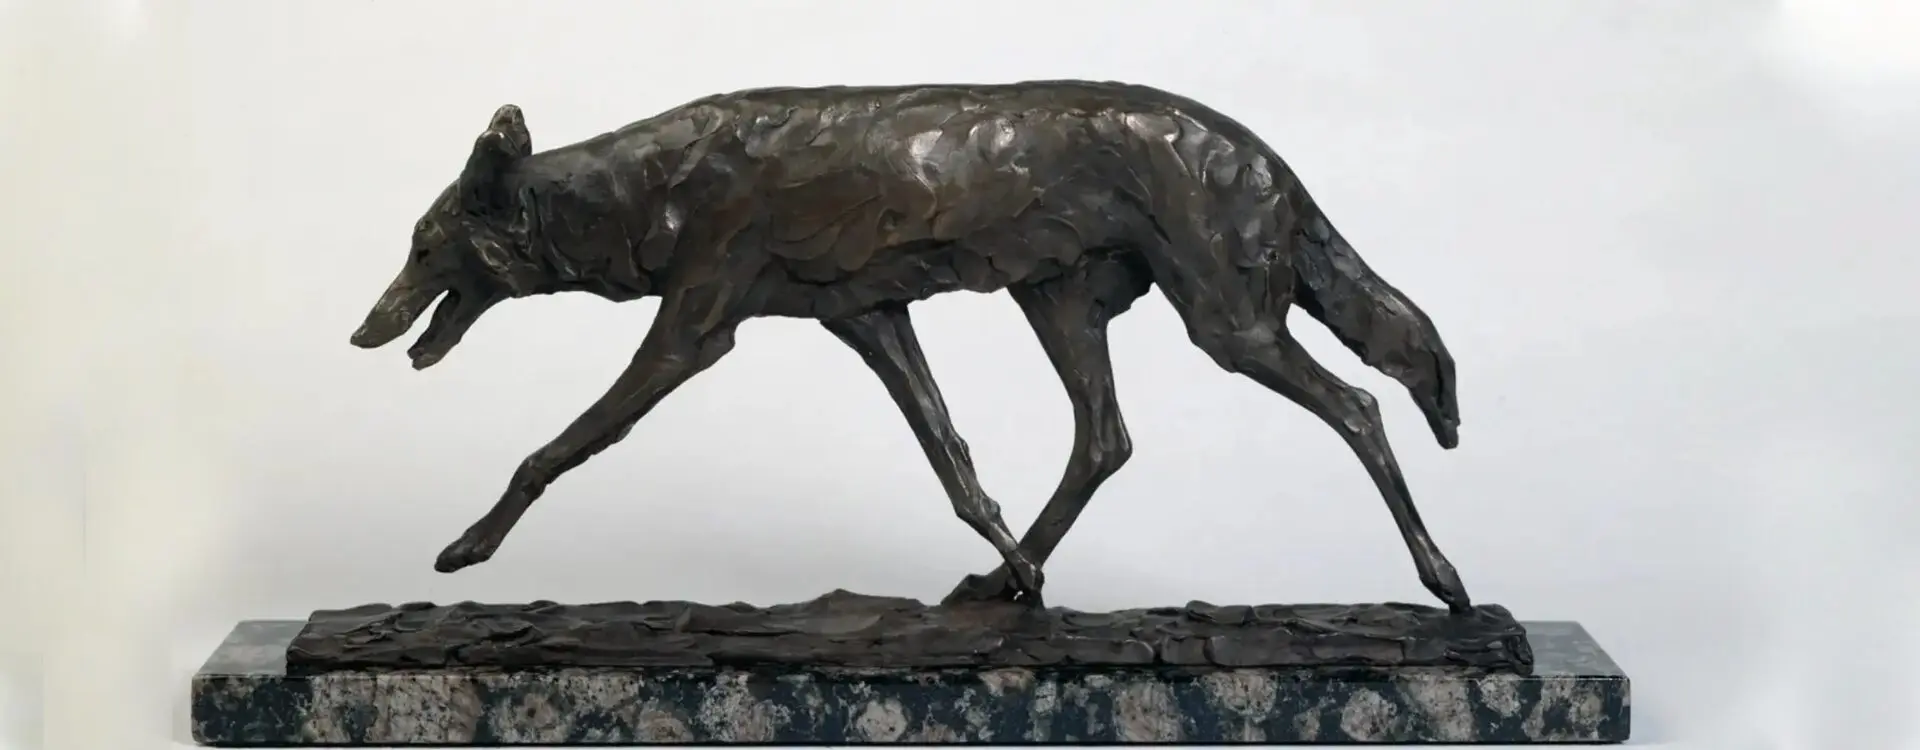 A dog statue is shown in the middle of a wall.